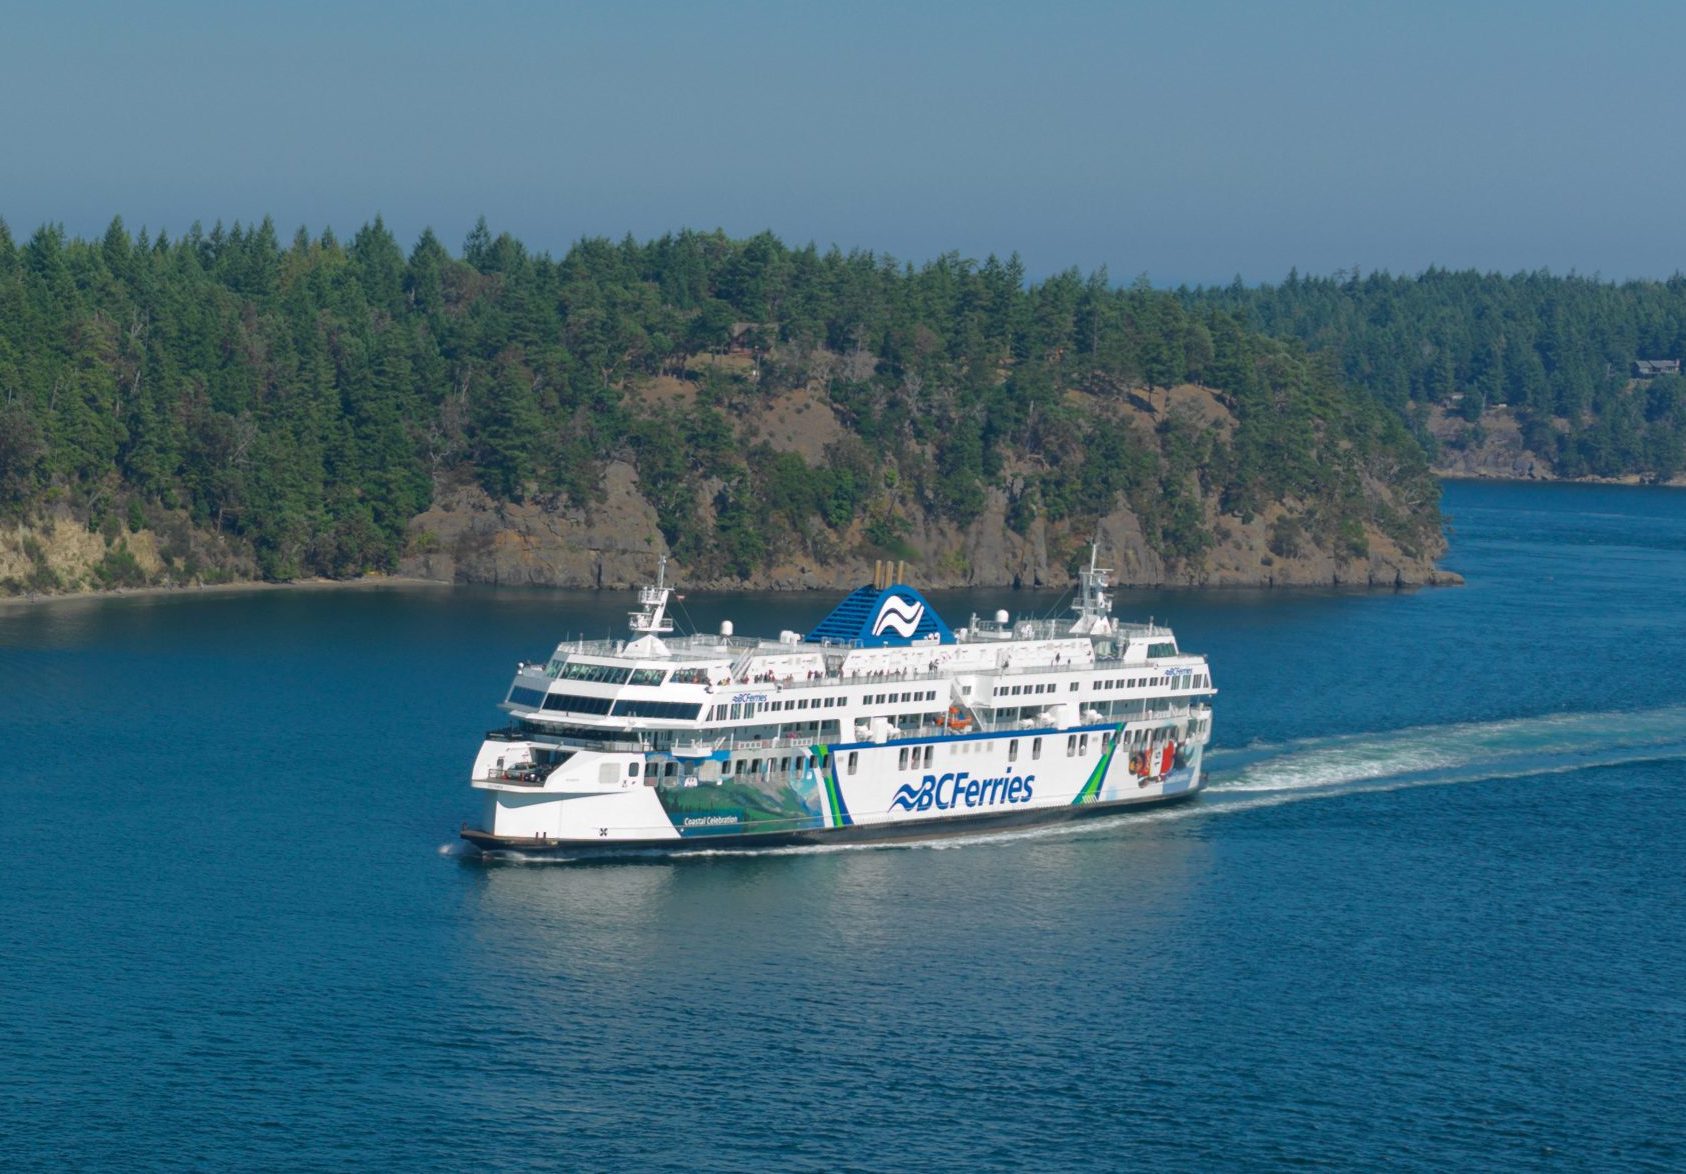 CEO pledges BC Ferries will do better, but admits company ‘running
thin right now’